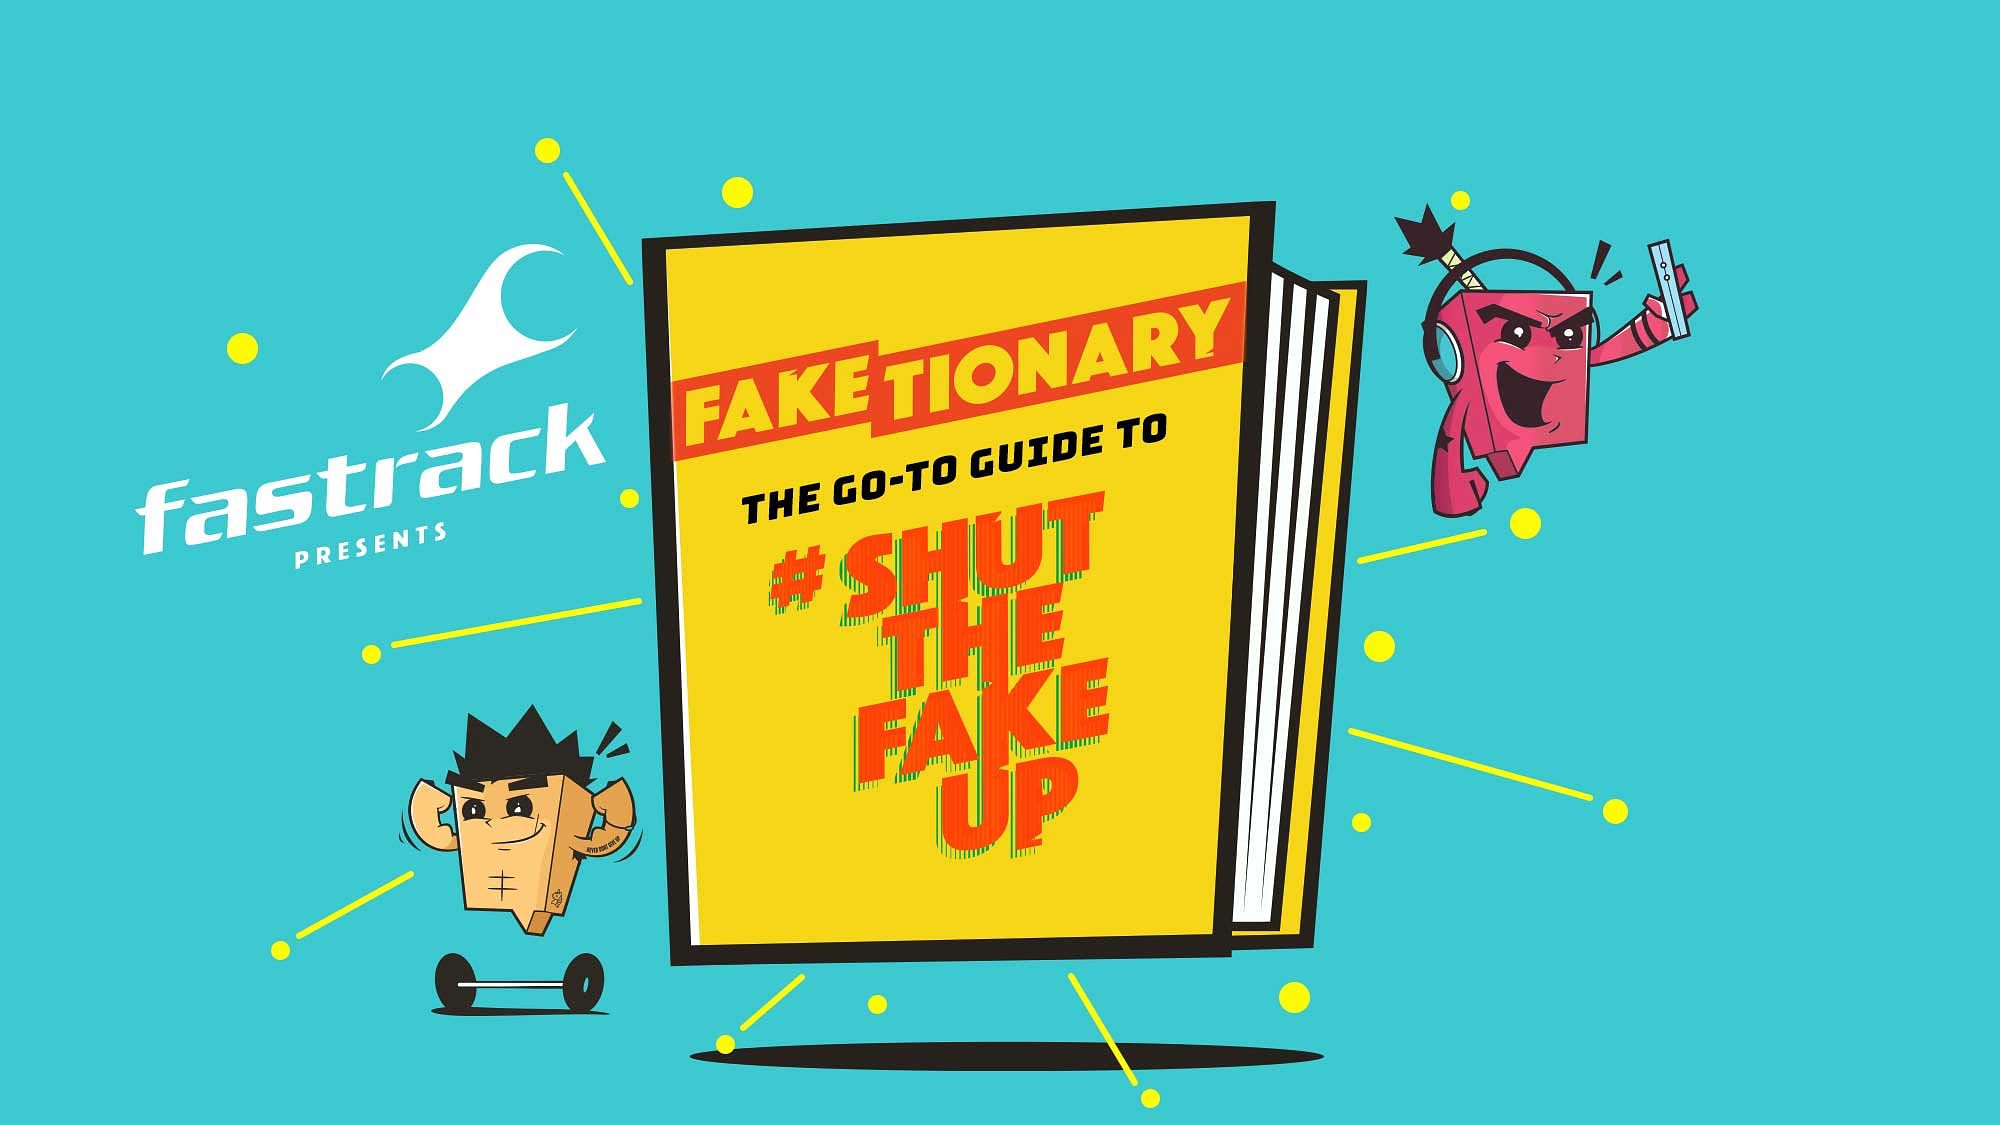 The Faketionary is a dictionary that calls out fake behaviour.